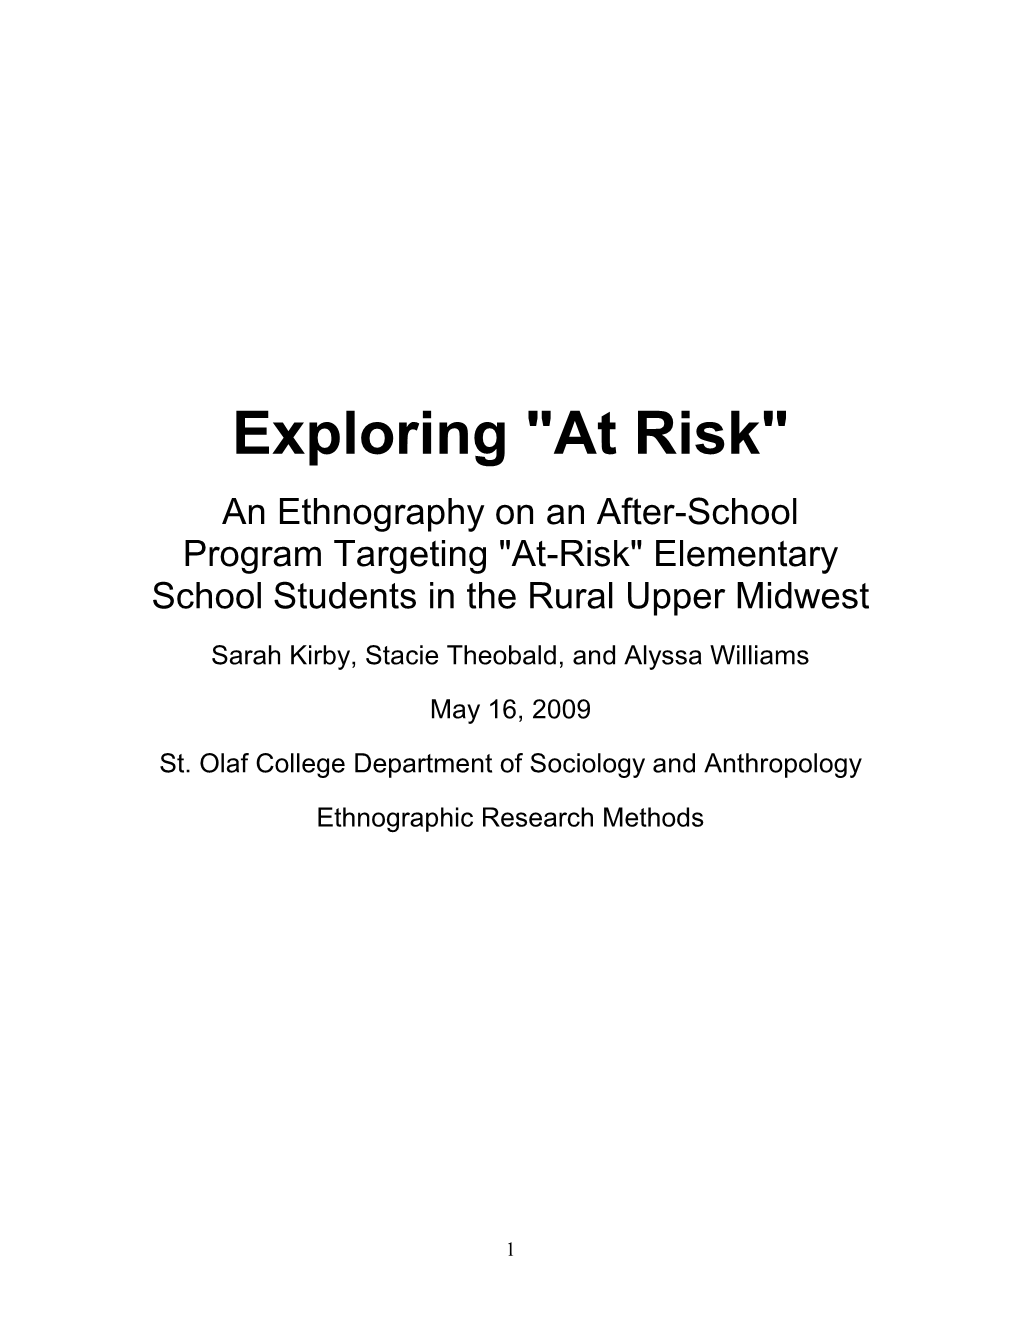 At Risk" an Ethnography on an After-School Program Targeting "At-Risk" Elementary School Students in the Rural Upper Midwest